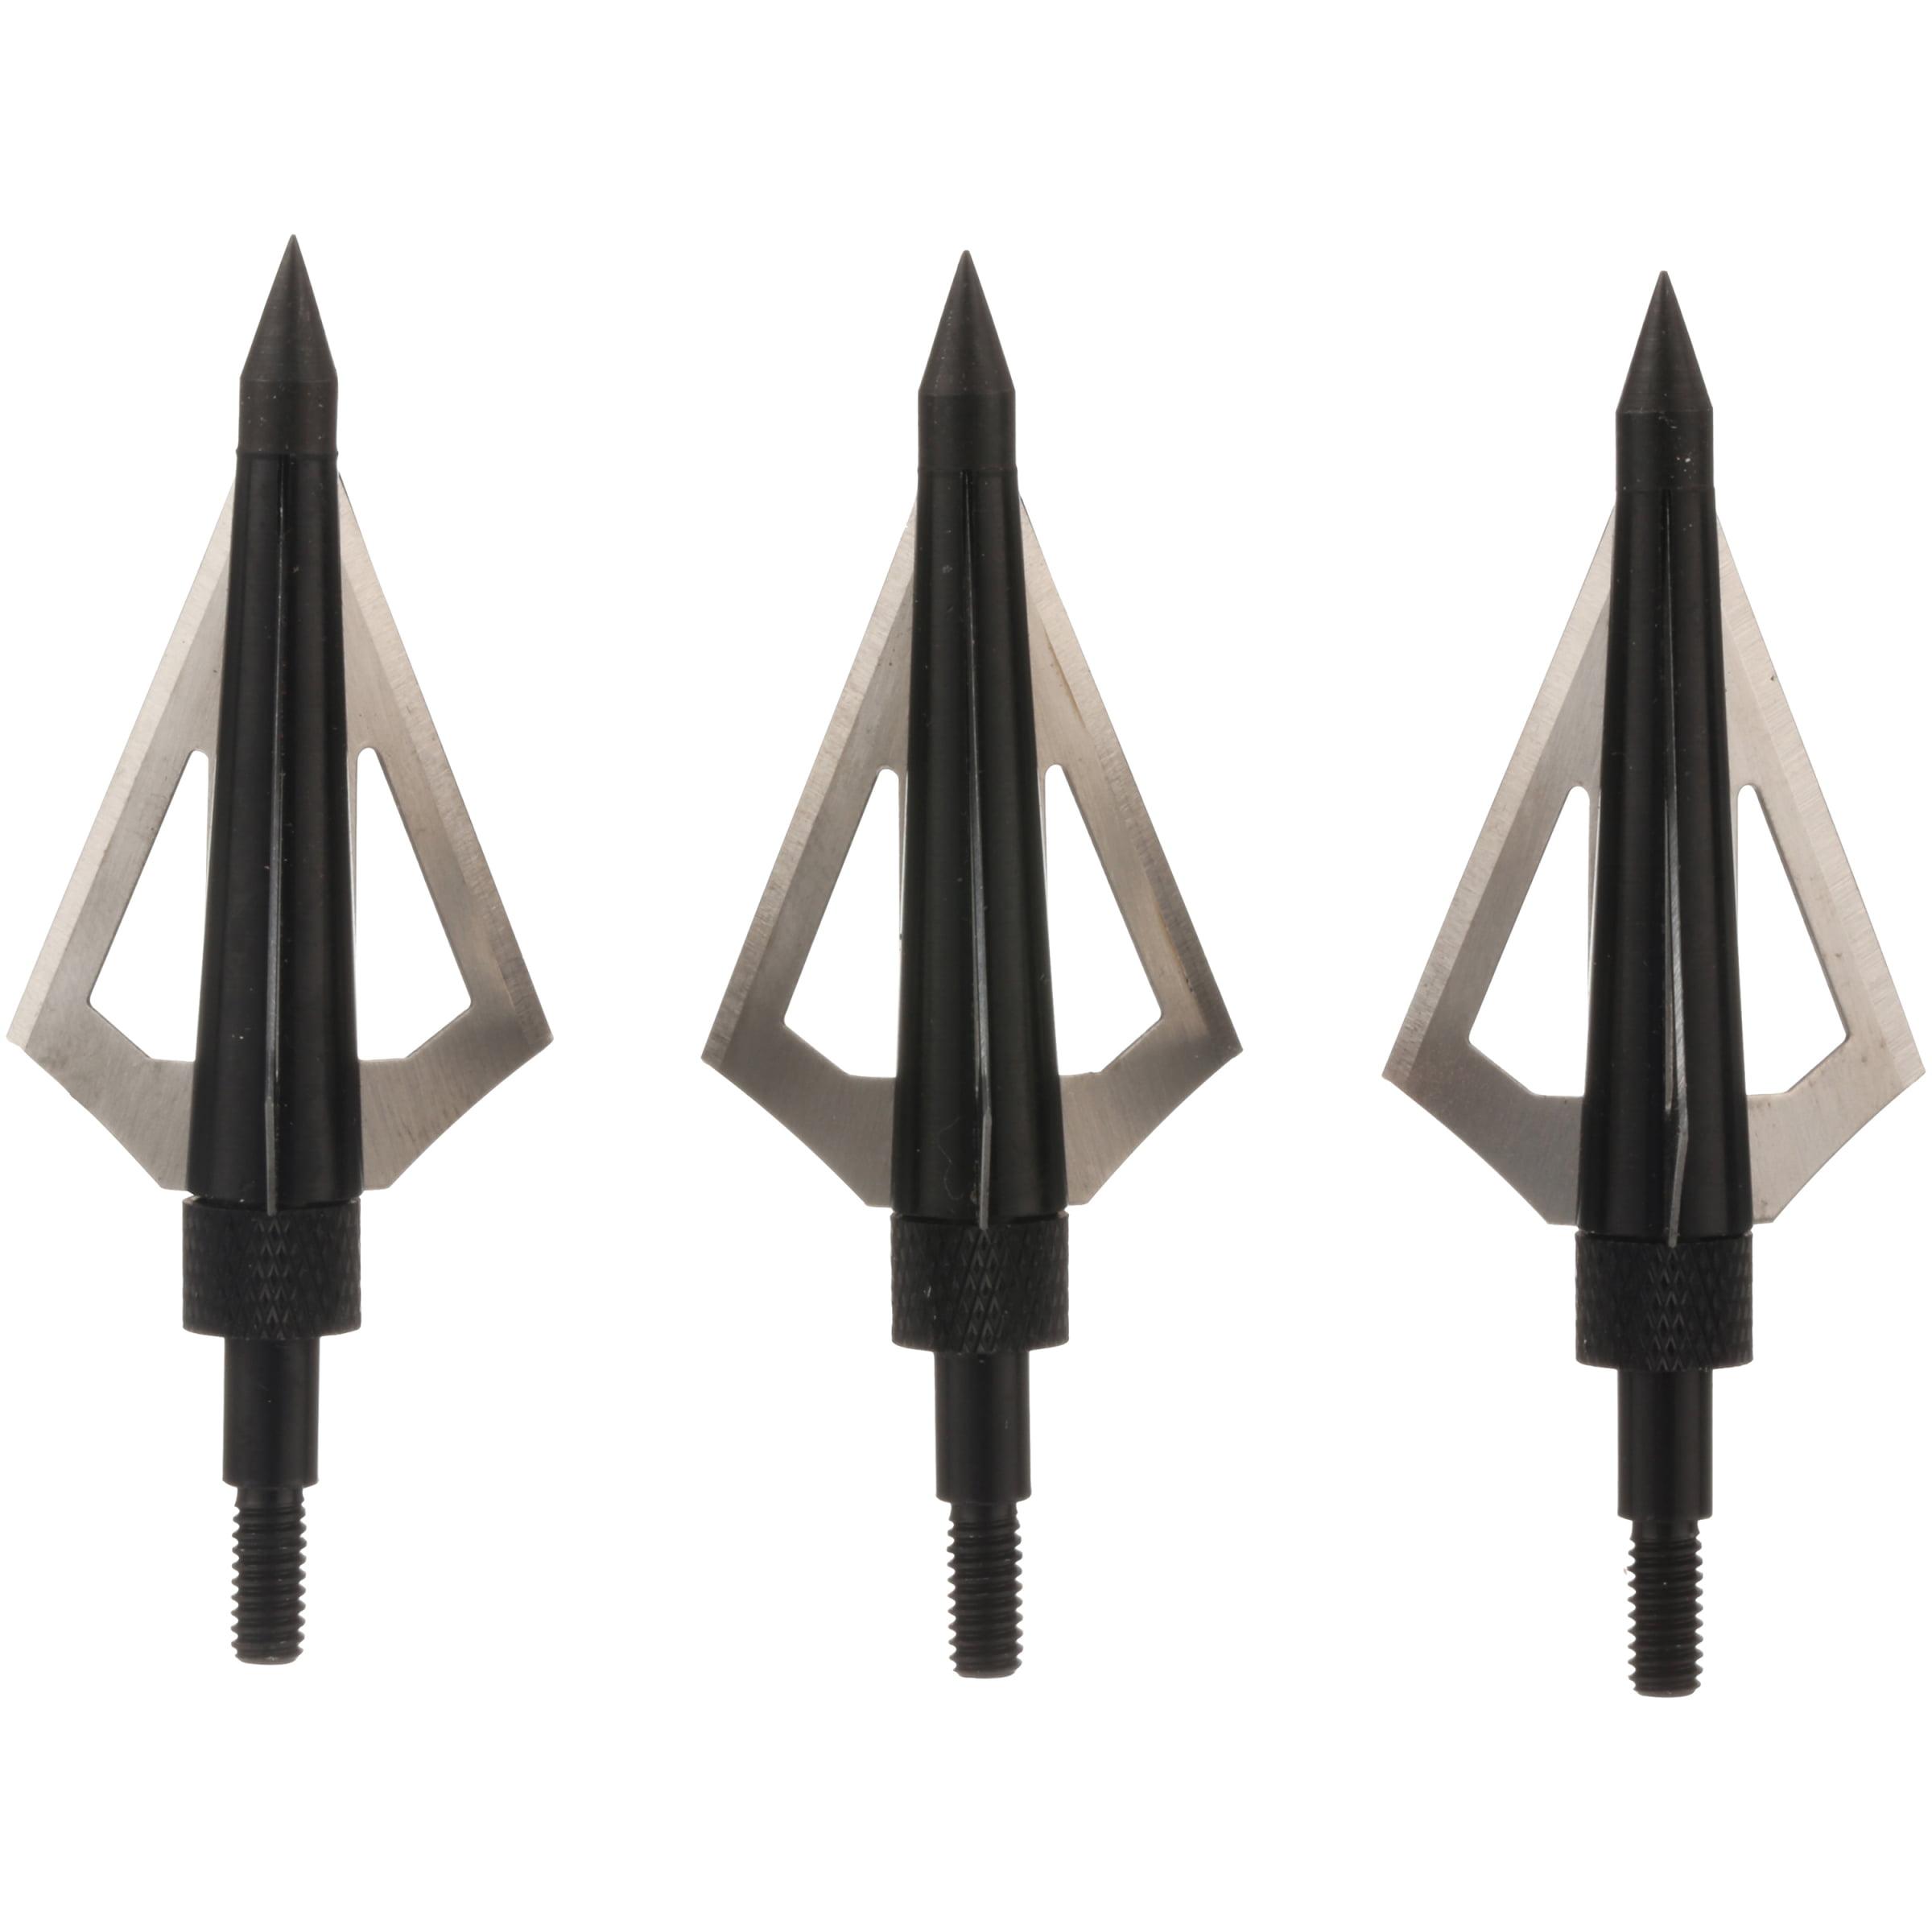 Glizzly Archery Broadhead 3 Ct Pack By Allen Company 7552